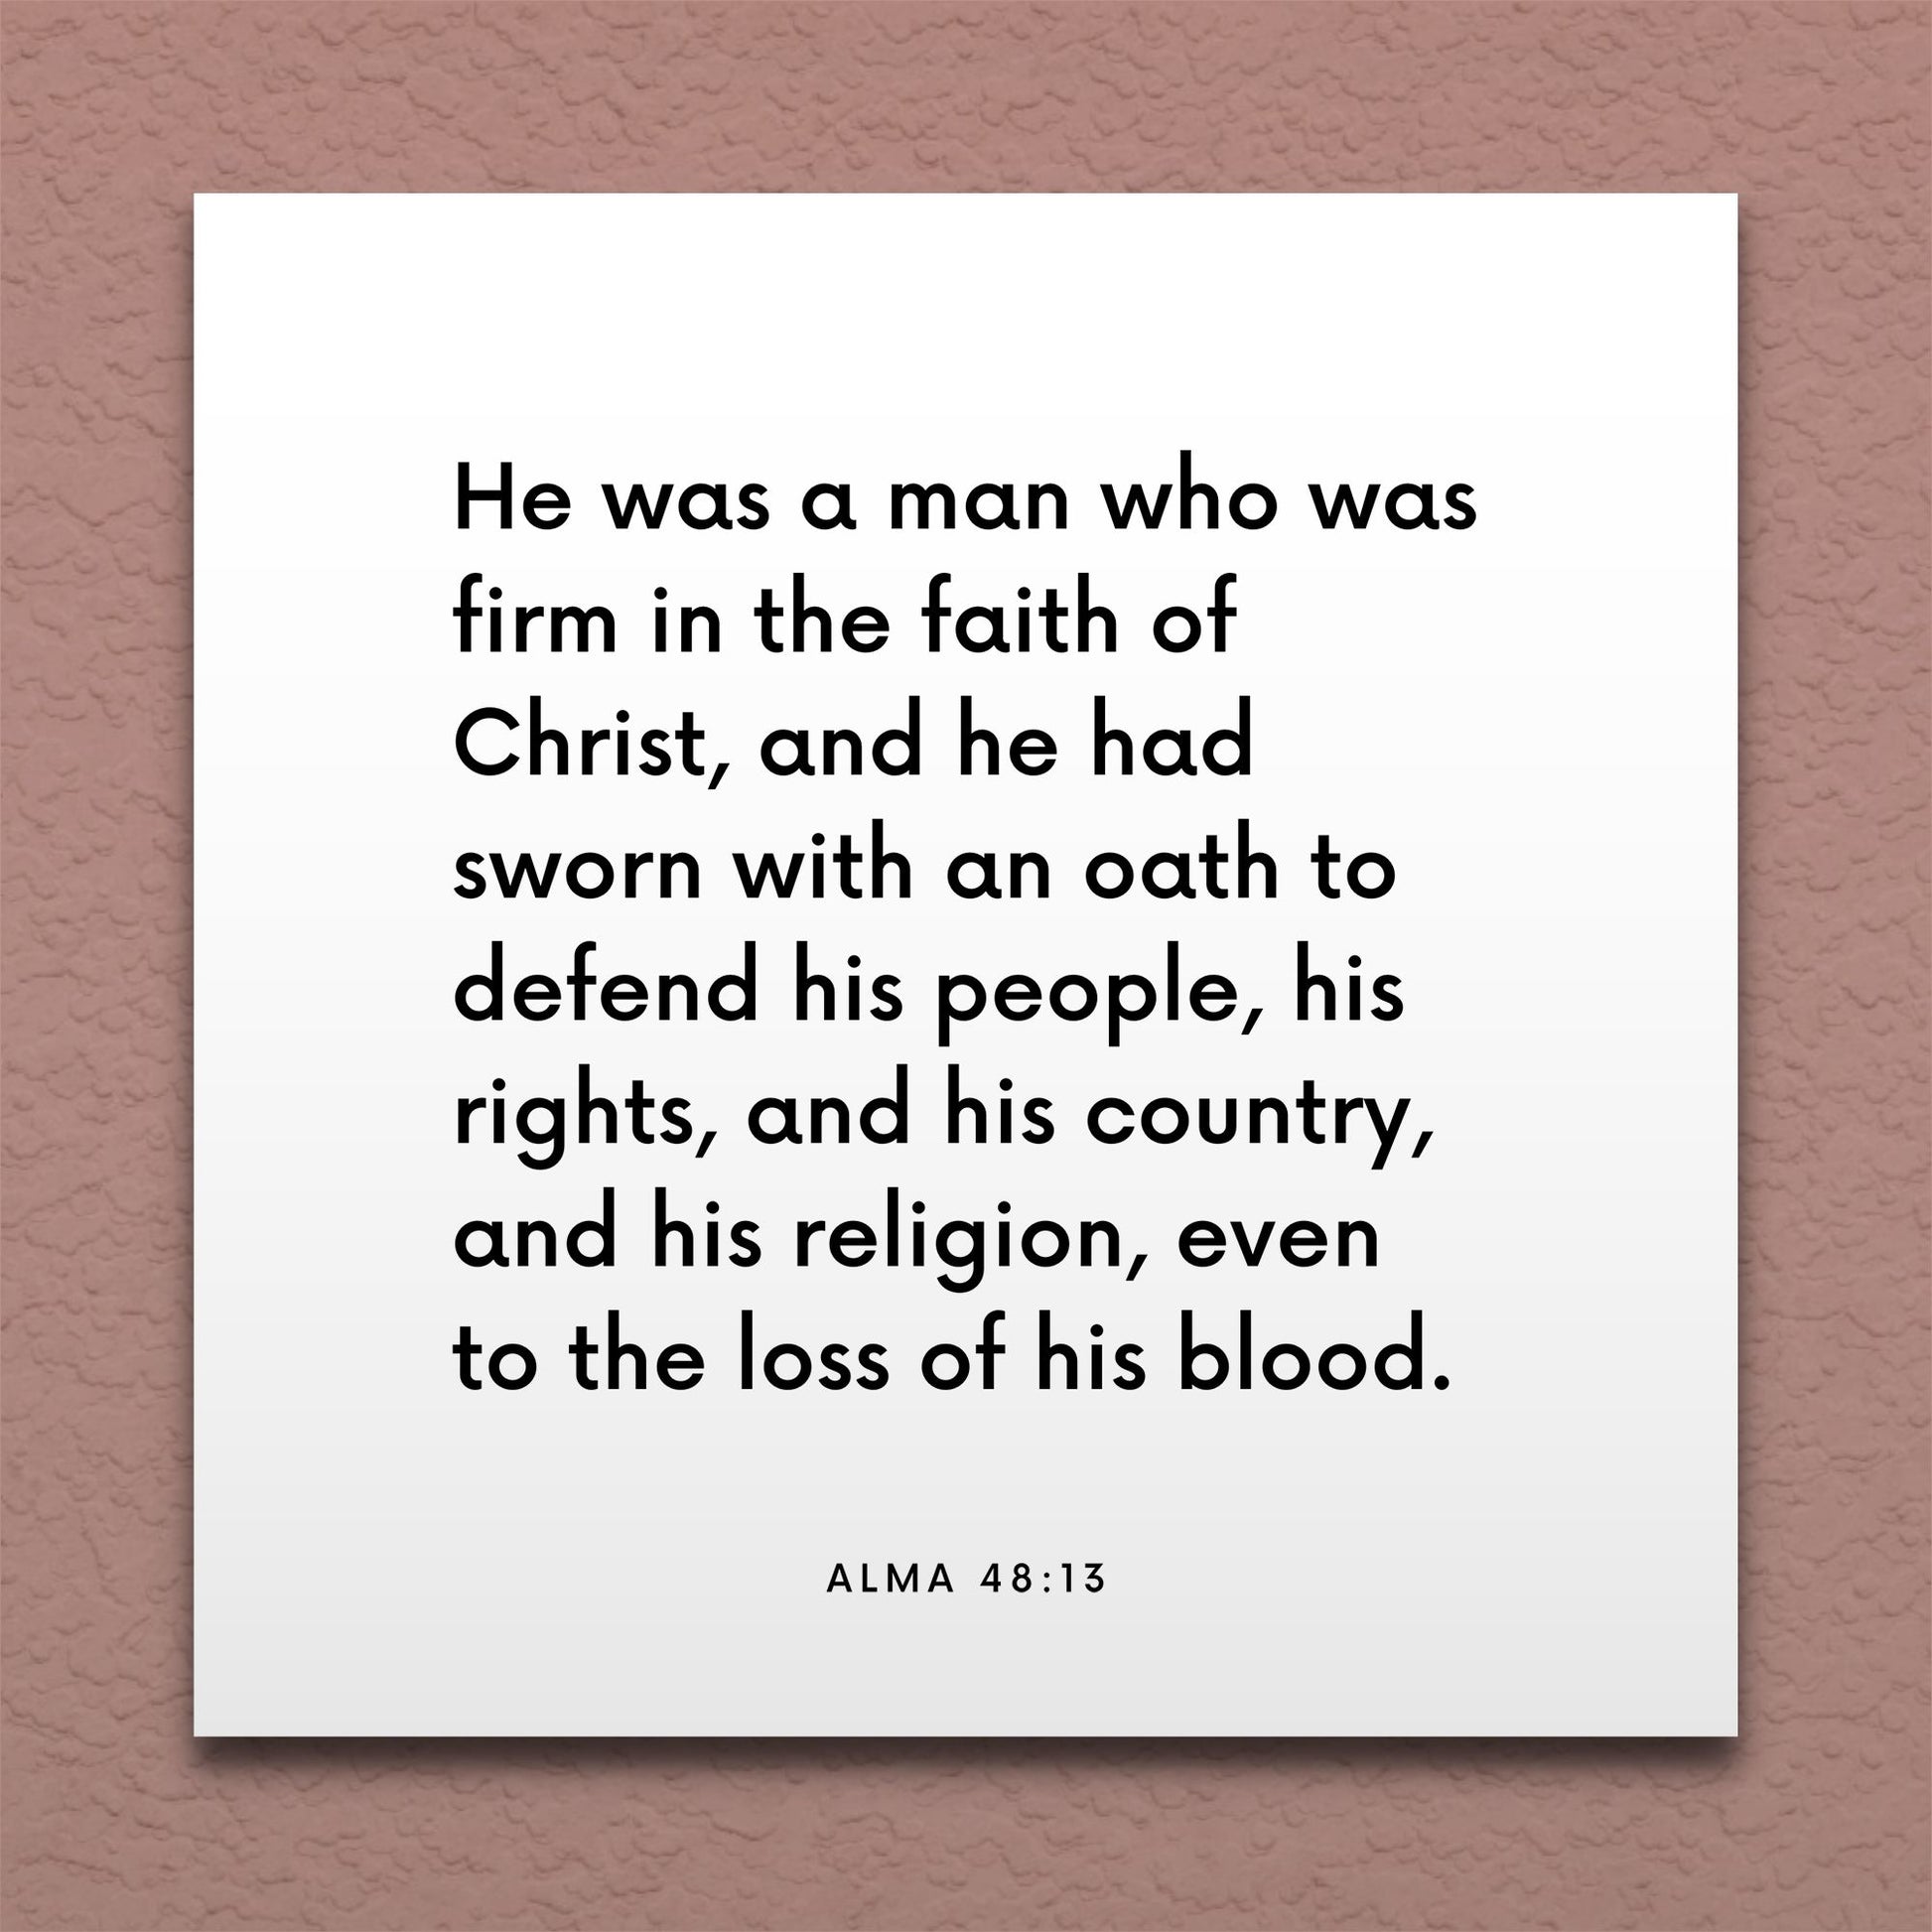 Wall-mounted scripture tile for Alma 48:13 - "He was a man who was firm in the faith of Christ"